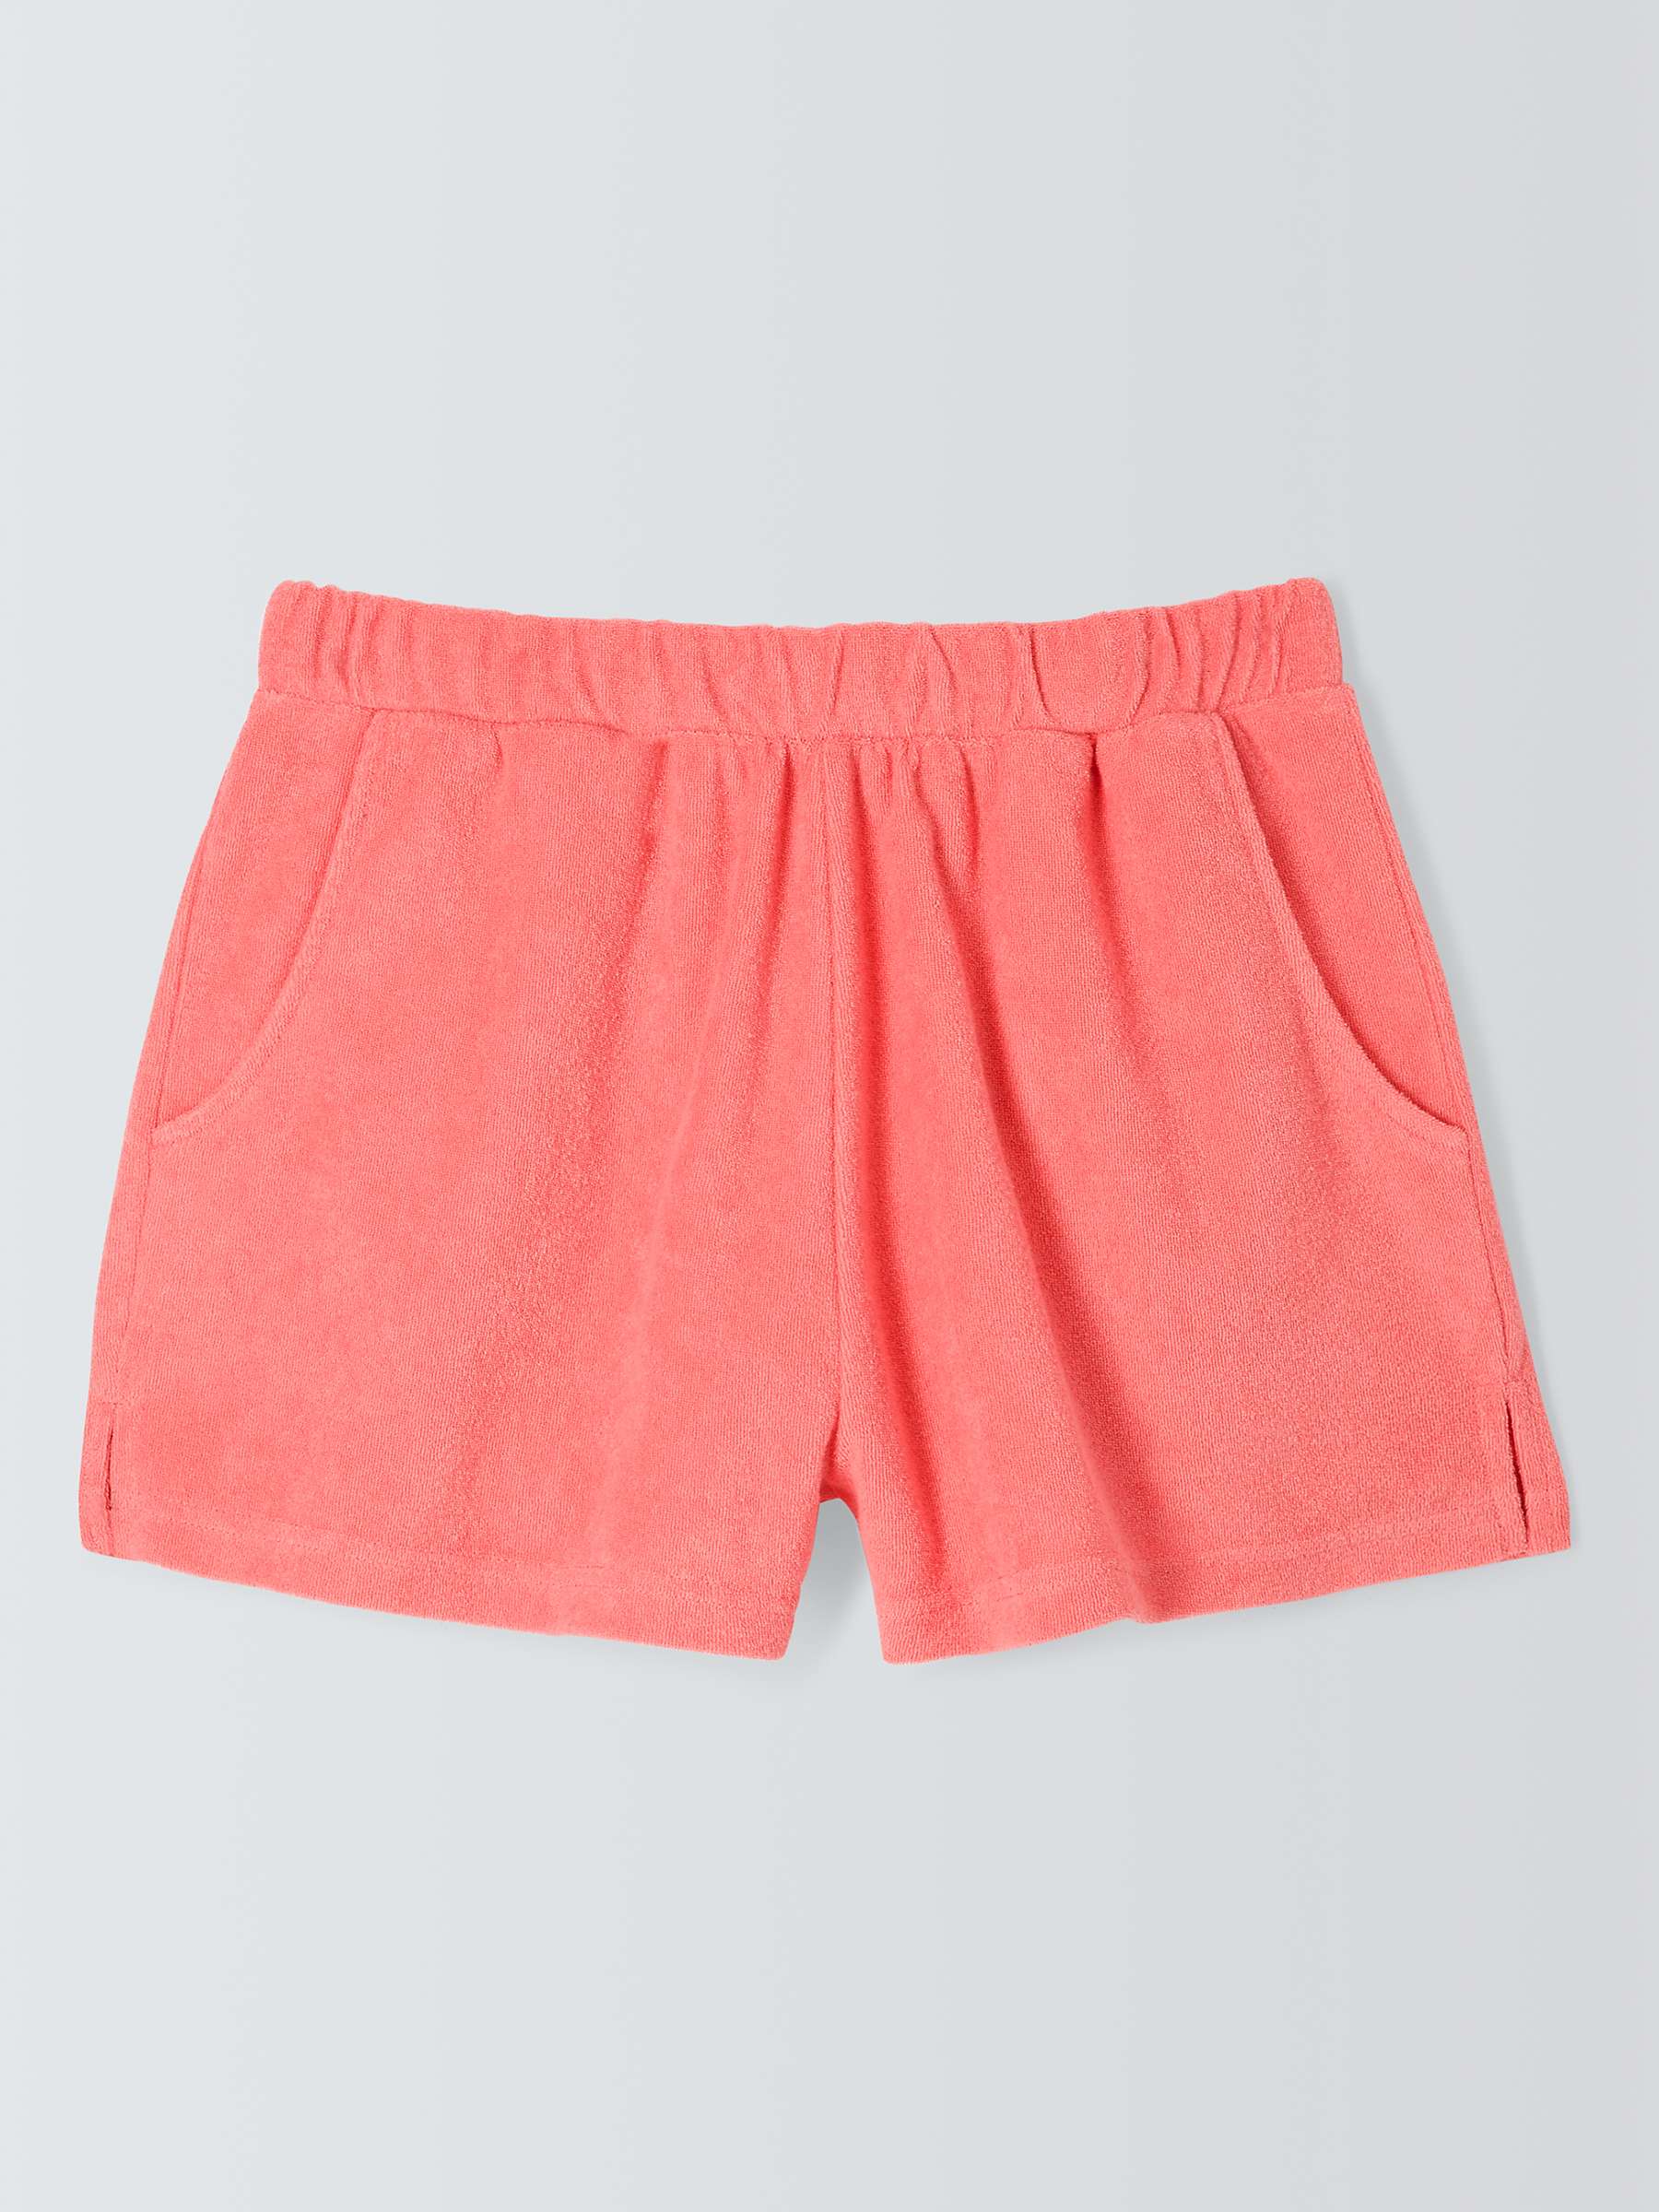 Buy John Lewis ANYDAY Towelling Beach Shorts Online at johnlewis.com